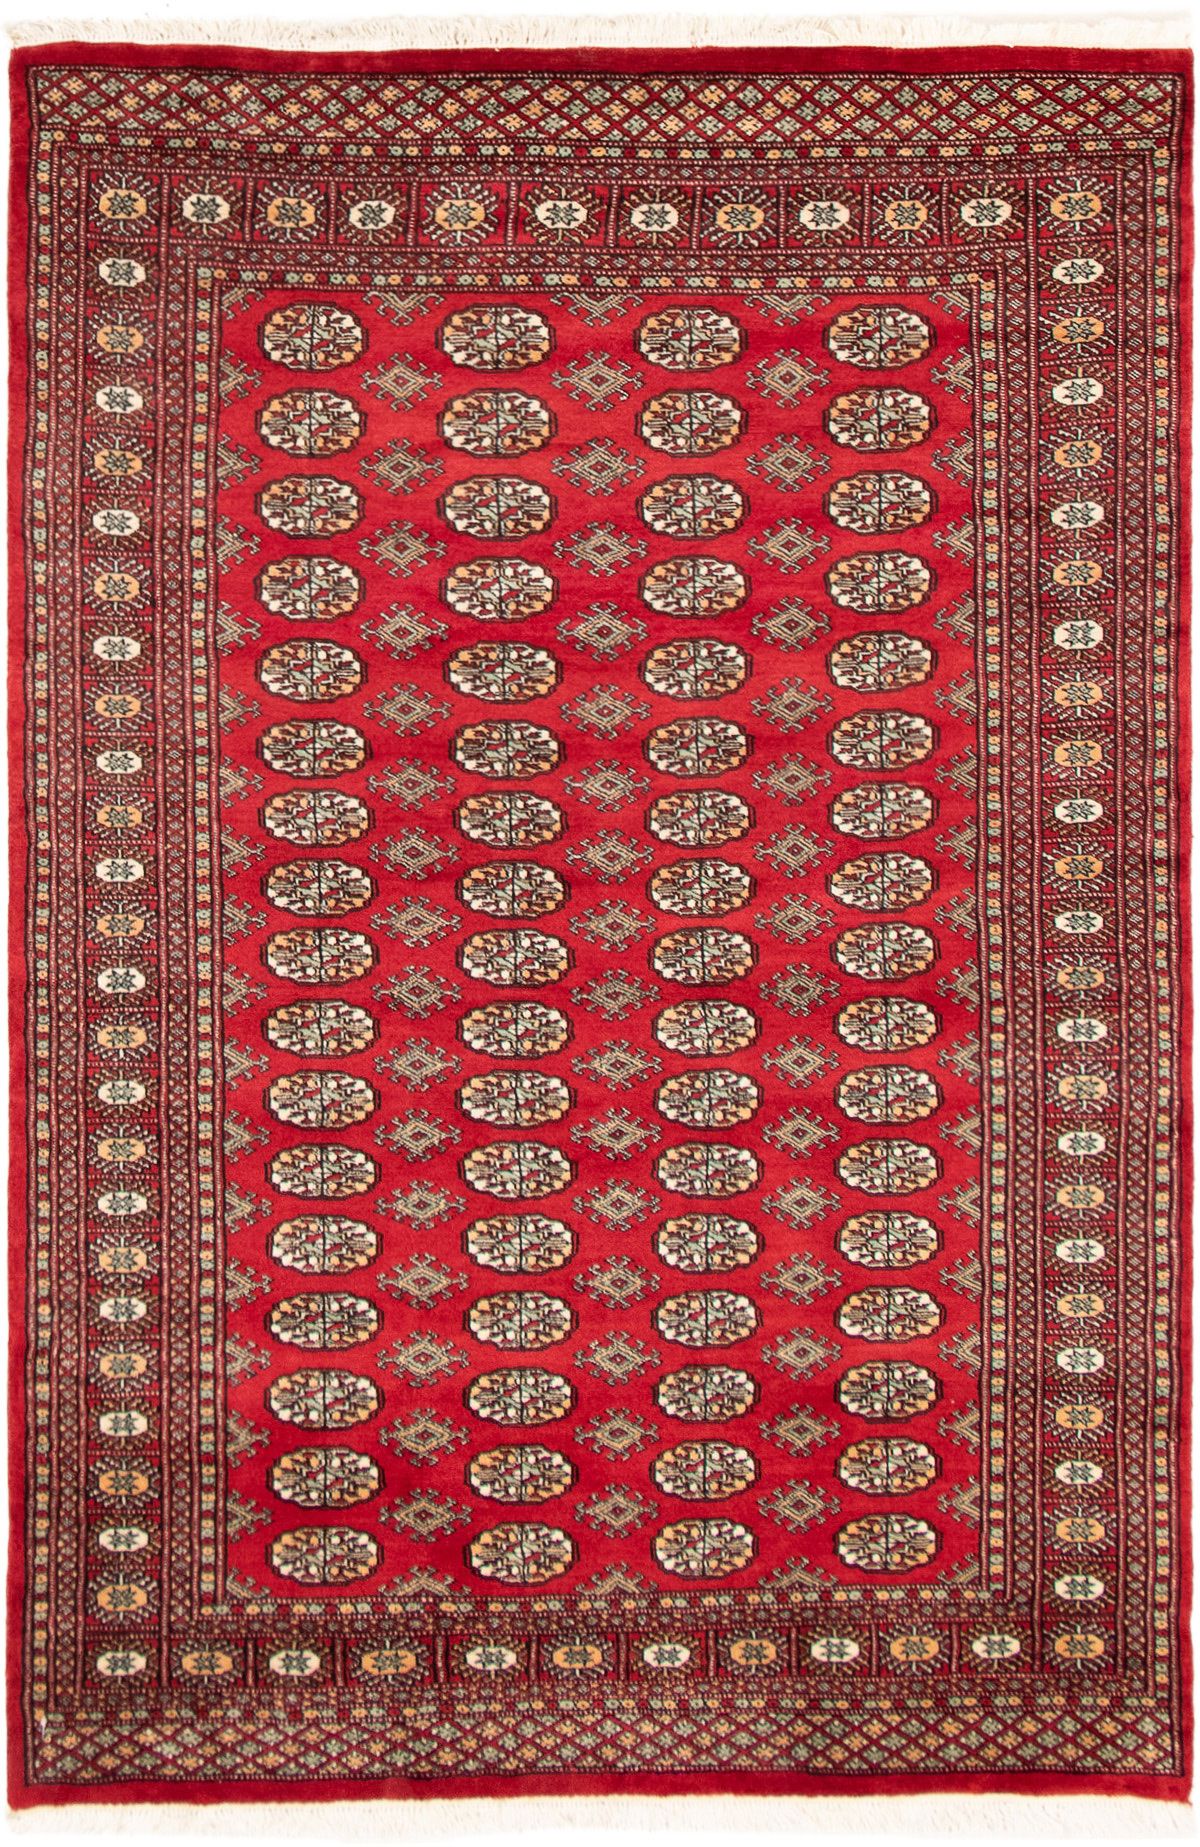 Hand-knotted Finest Peshawar Bokhara Red Wool Rug 5'1" x 7'8" Size: 5'1" x 7'8"  